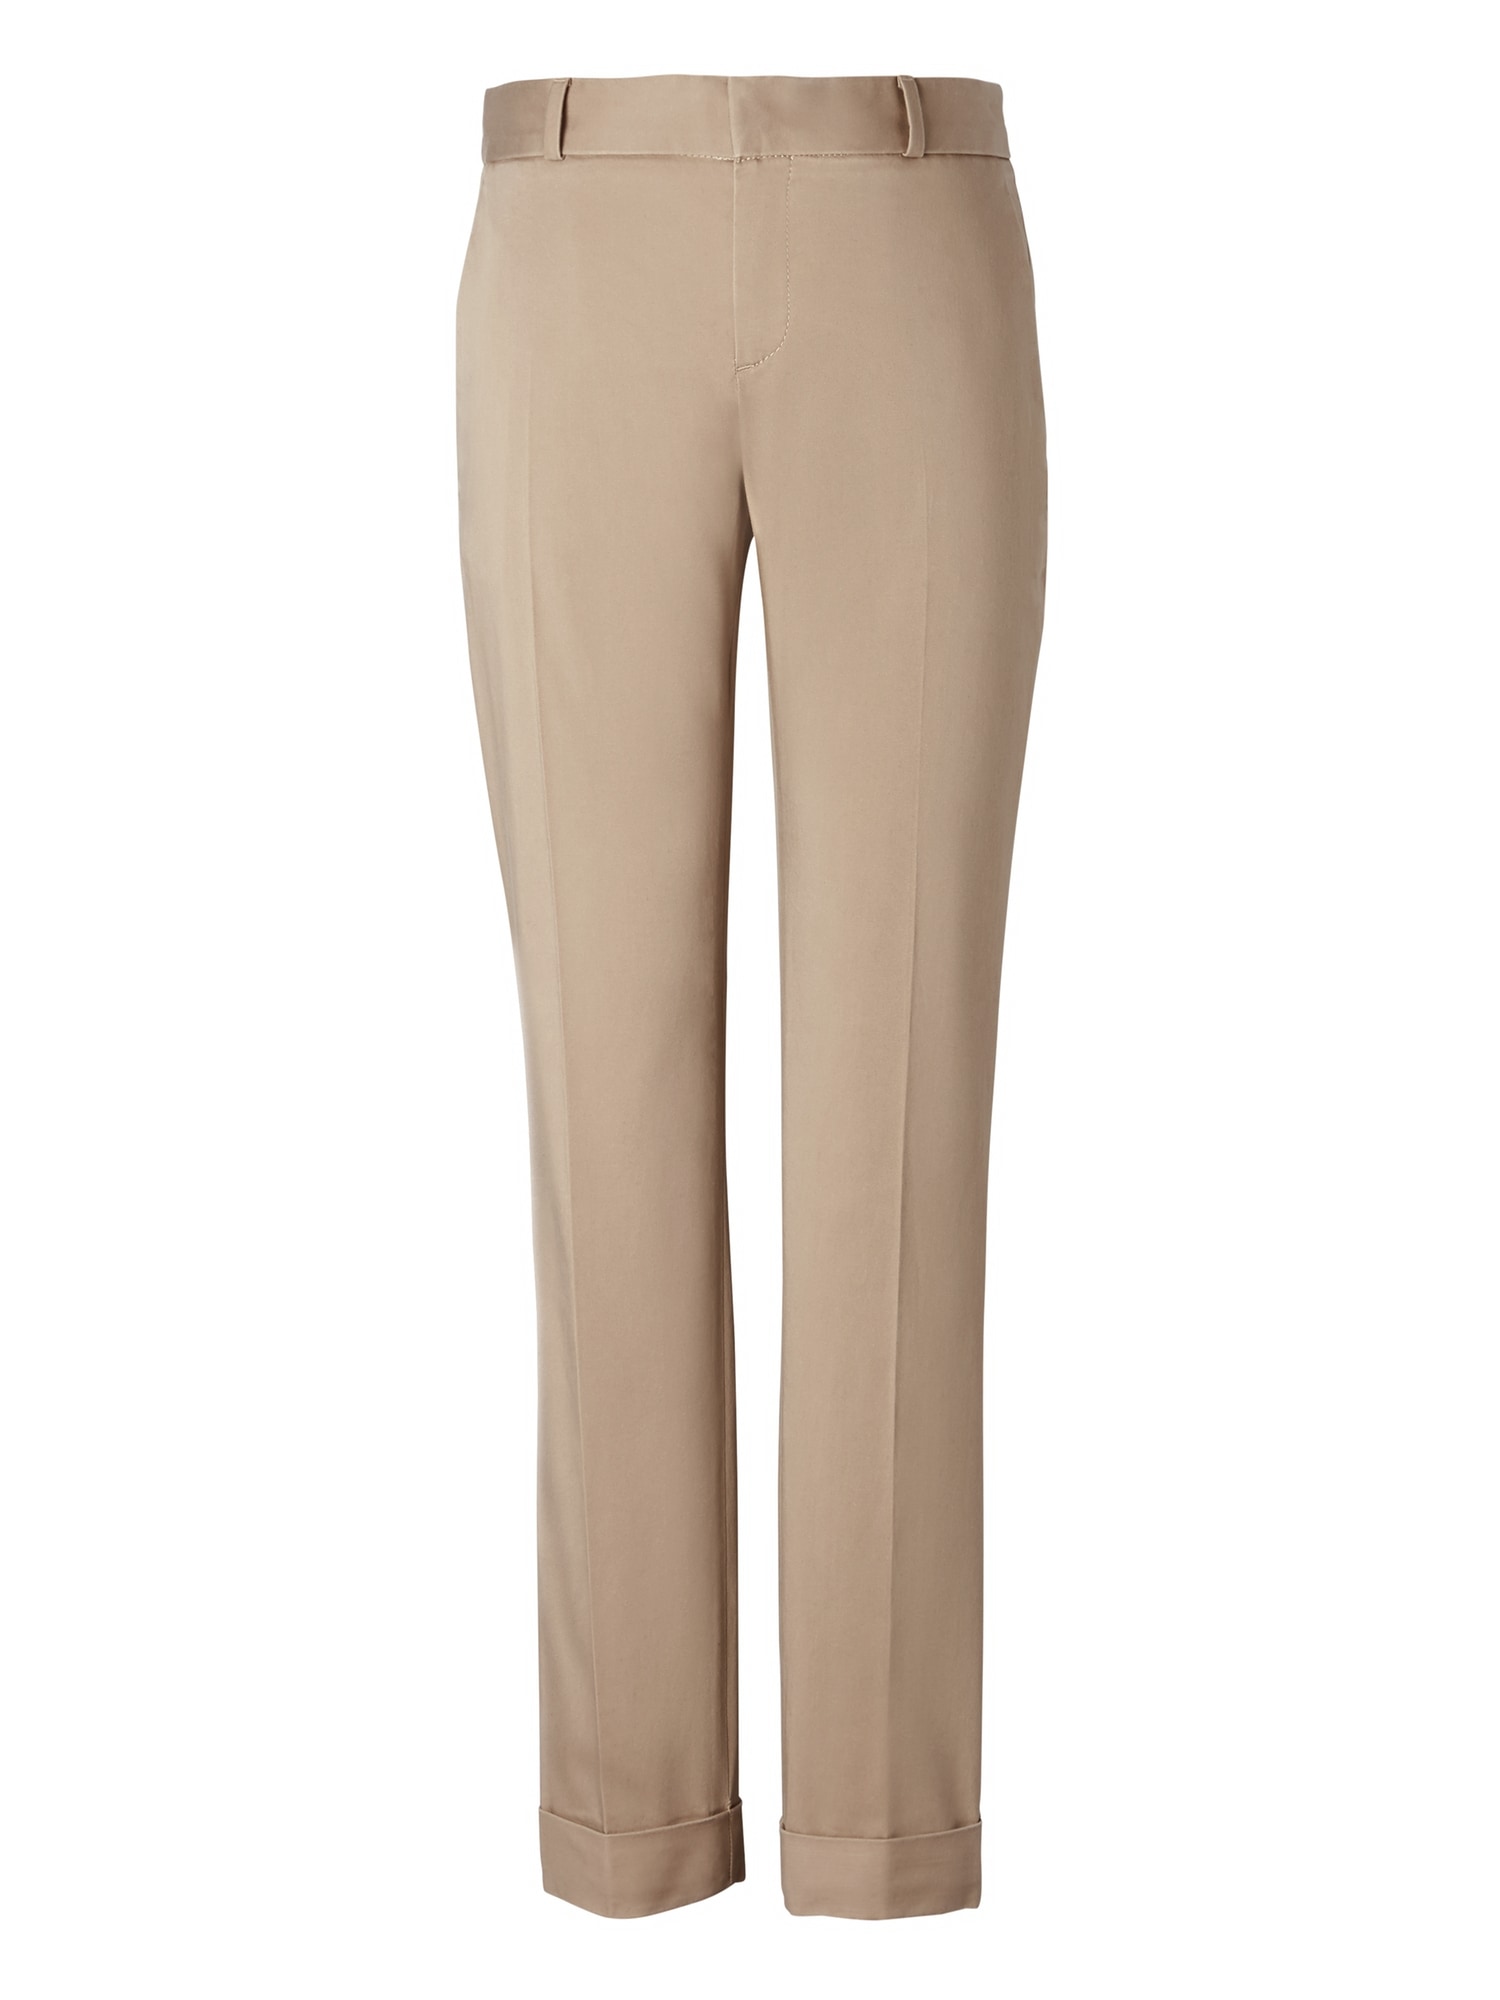 Avery Straight-Fit Sateen Ankle Pant with Cuff